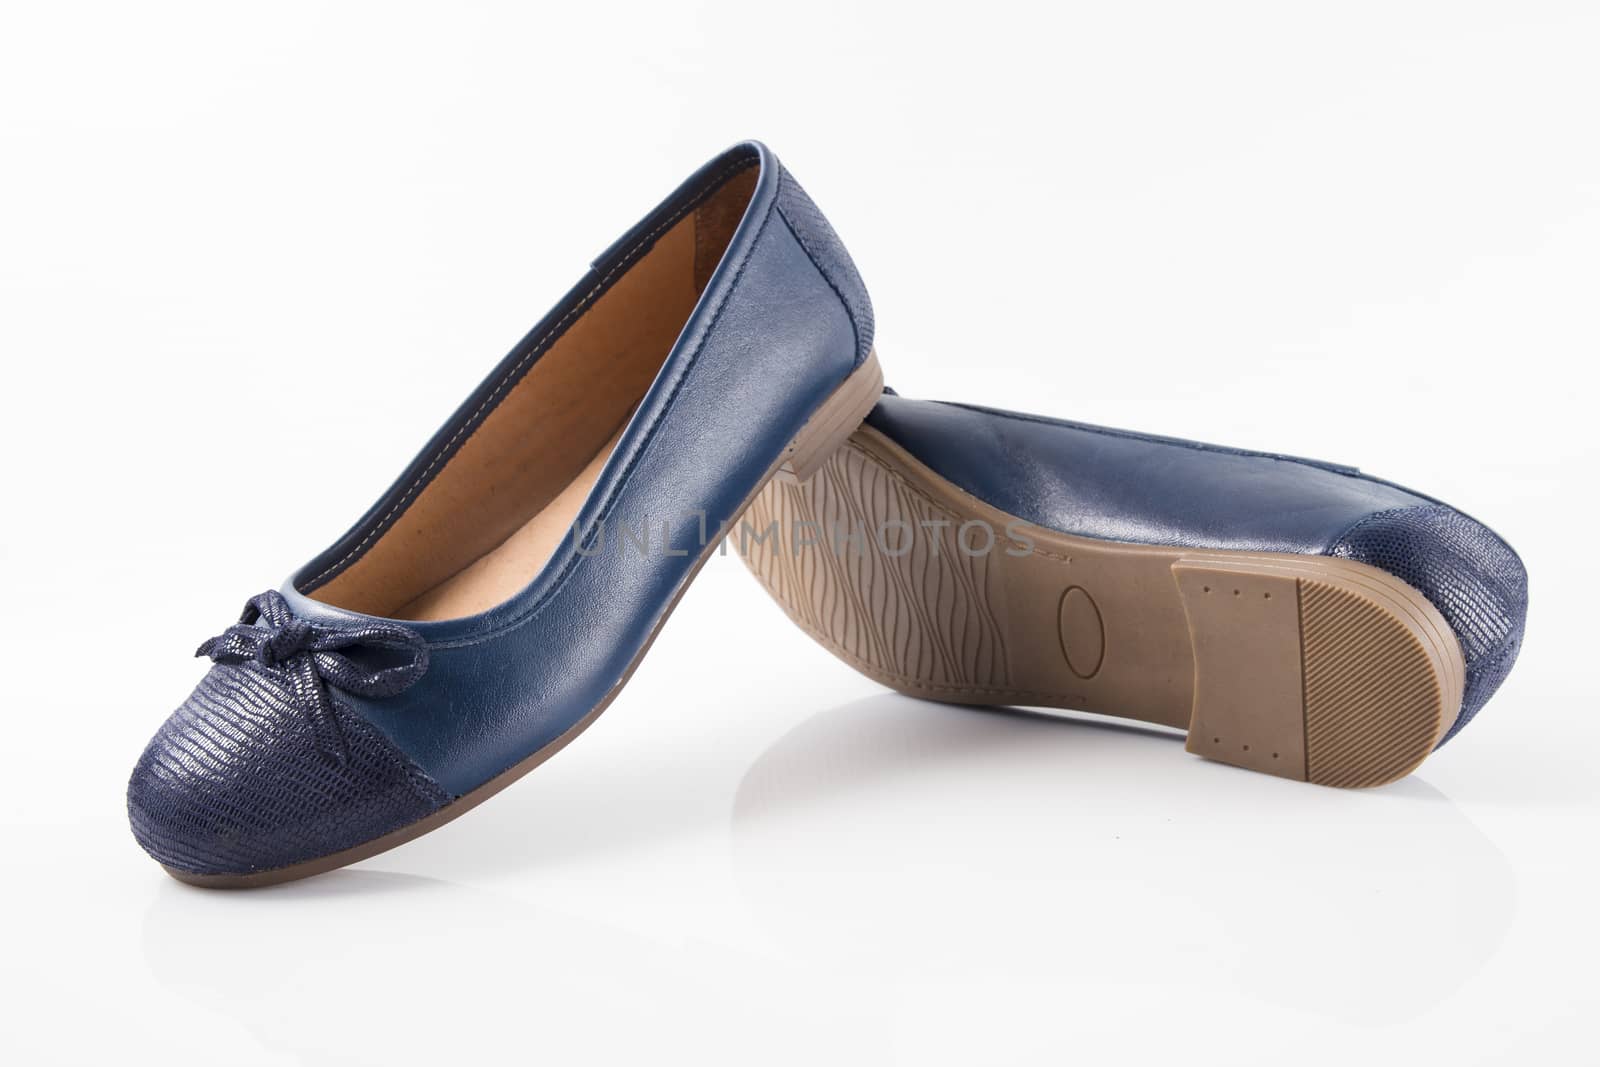 Pair of blue leather shoes on white background, isolated product, top view. by GeorgeVieiraSilva